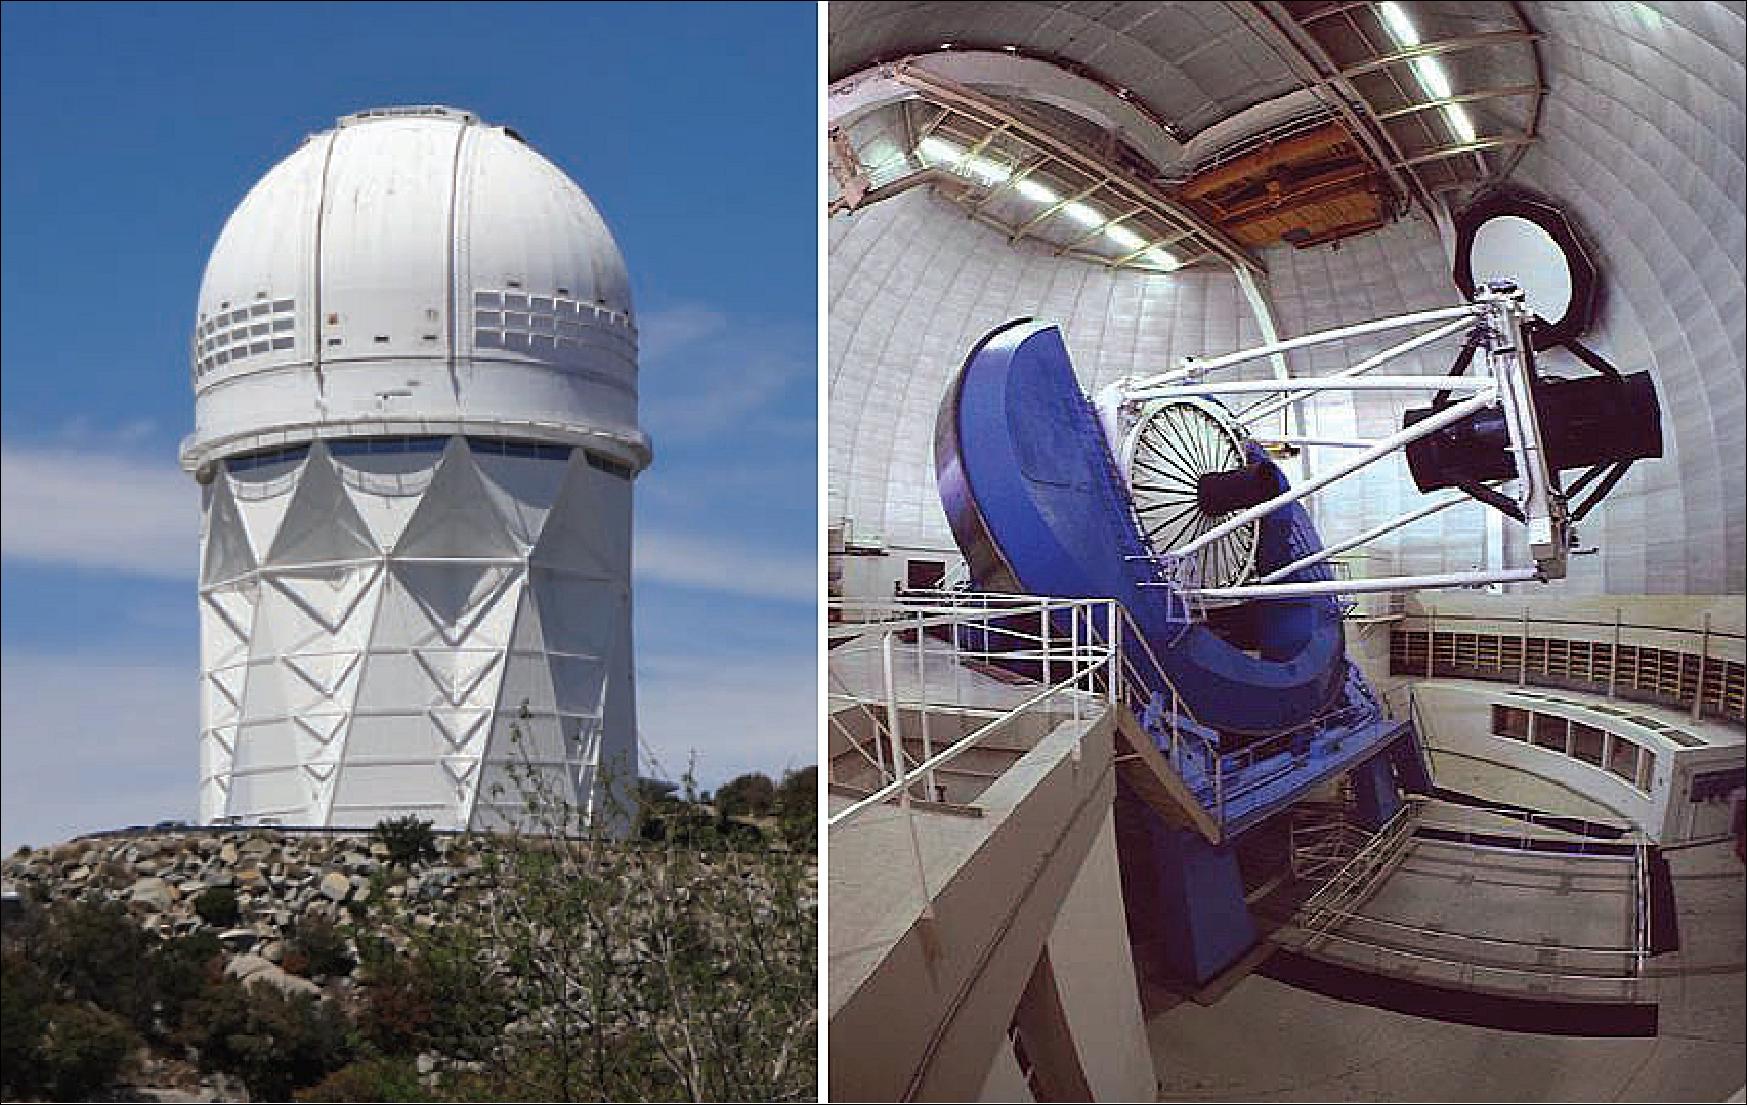 Figure 4: On the left is the Mayall 4m telescope dome structure. On the right is the telescope. The black cylinder is the MOSAIC corrector that will be replaced as part of the DESI project to instrument a 3 degree diameter FOV (image credit: DESI Collaboration)